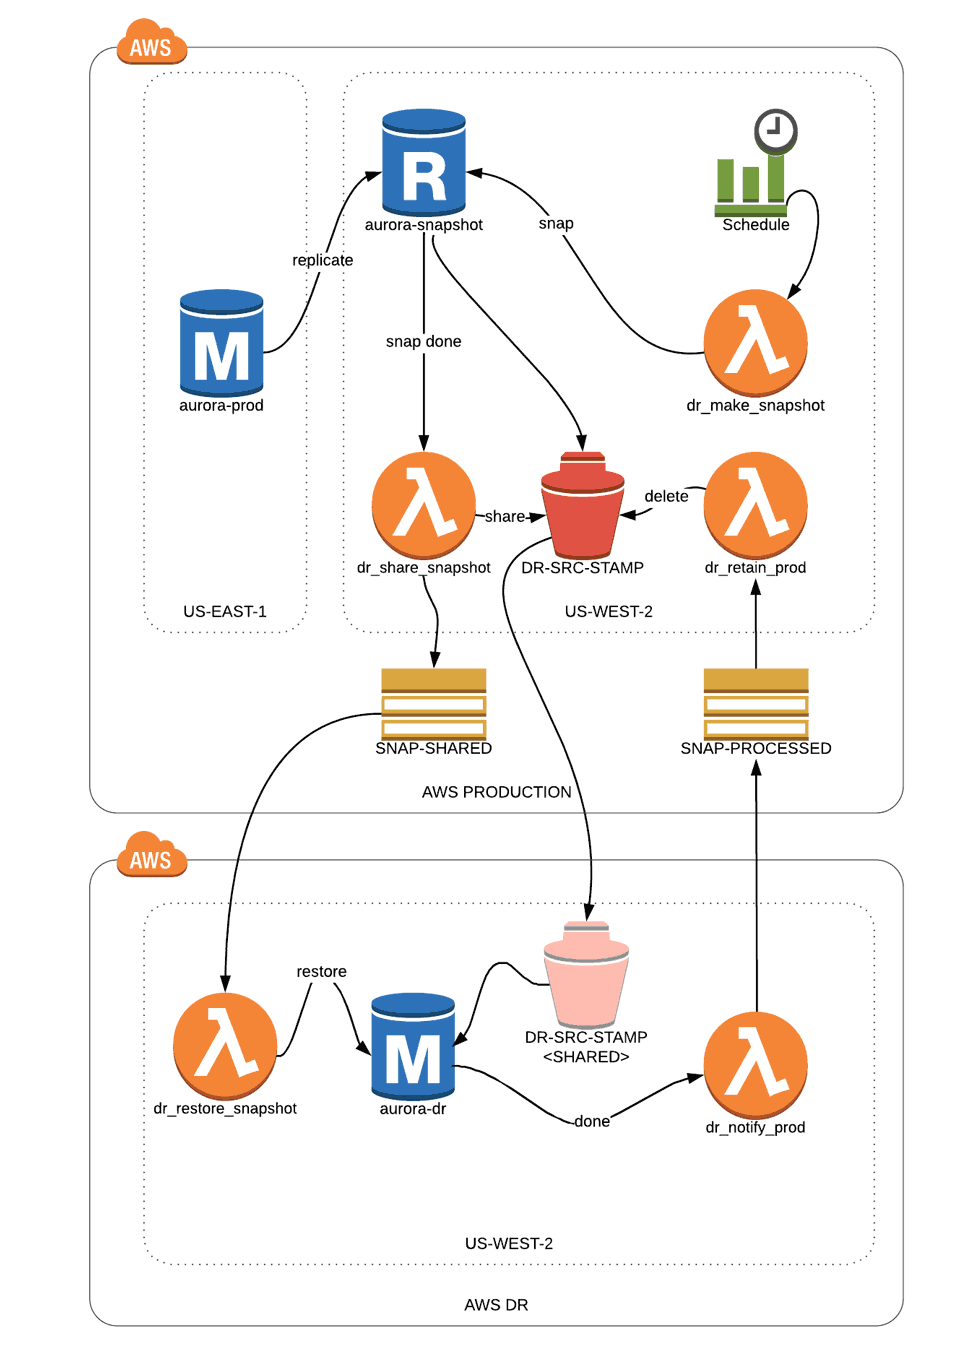 Database DR in Another AWS Region